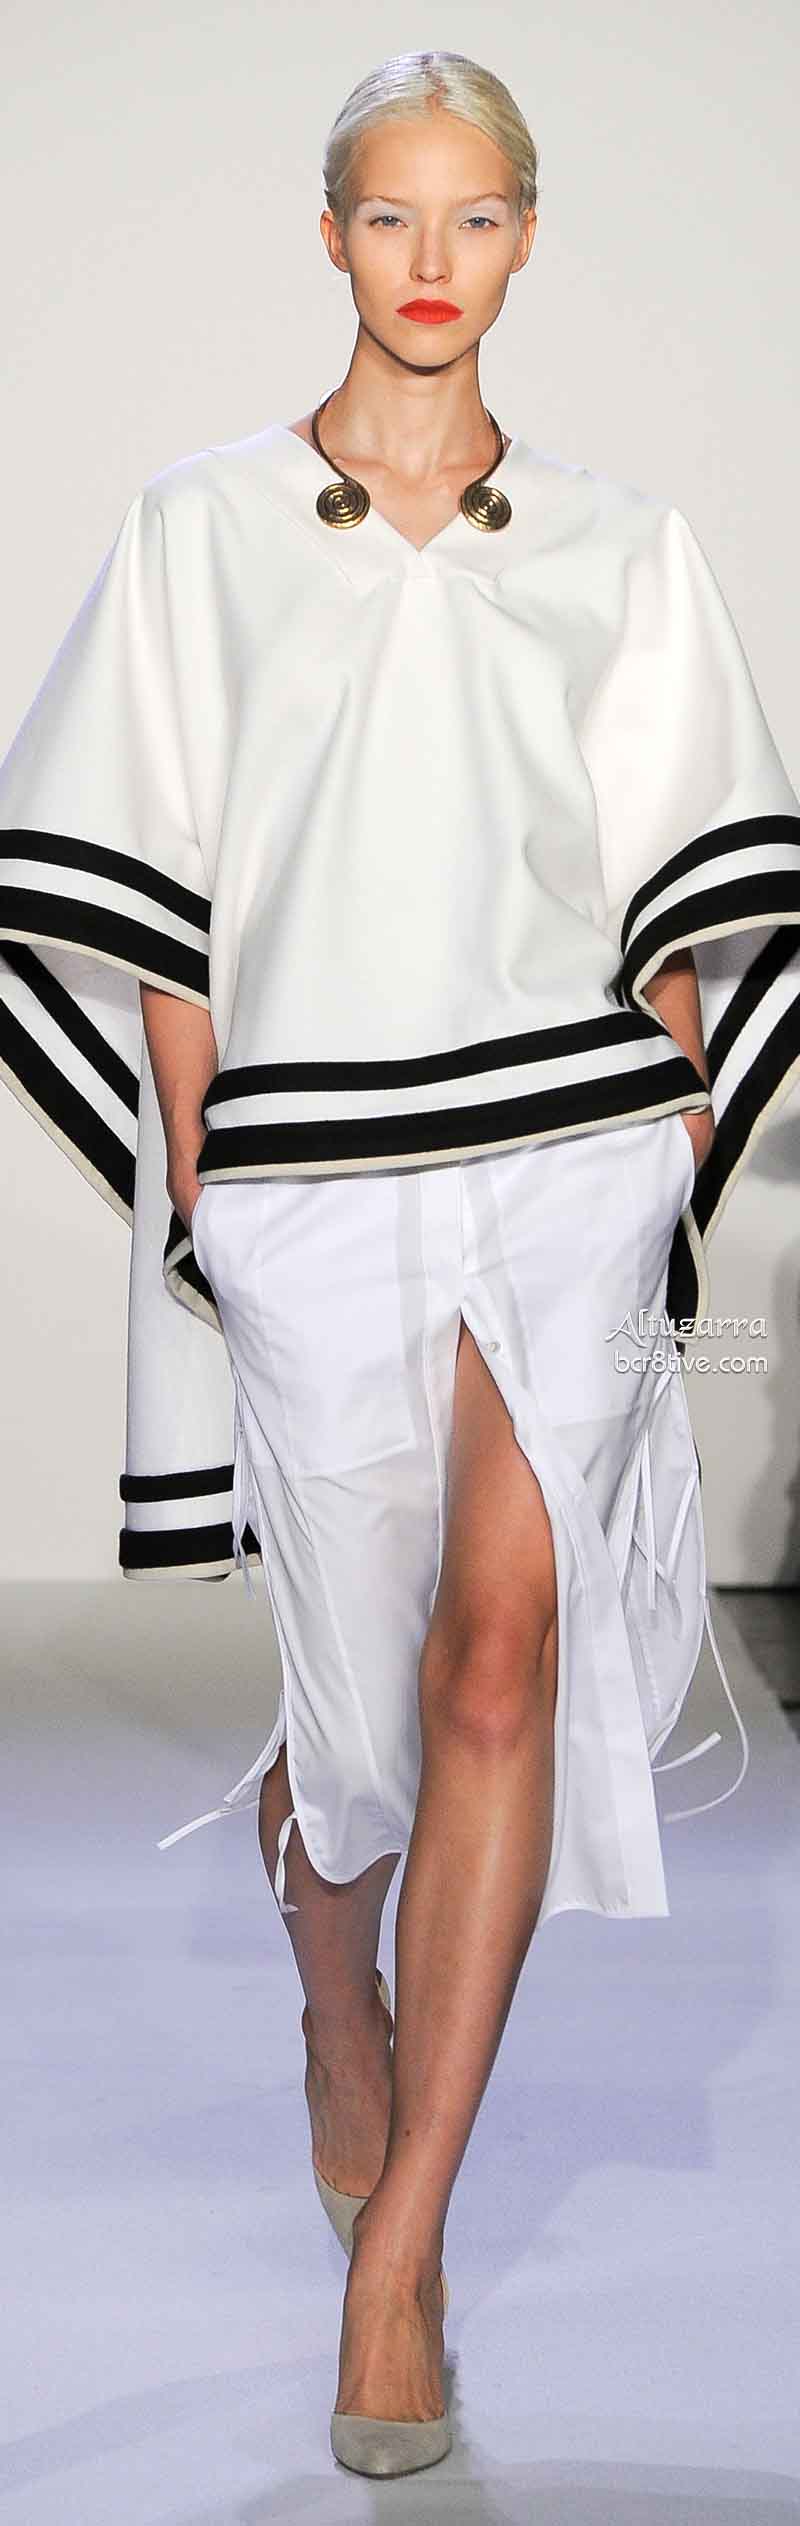 Altuzarra White Pencil Skirt and Cape Styled Top